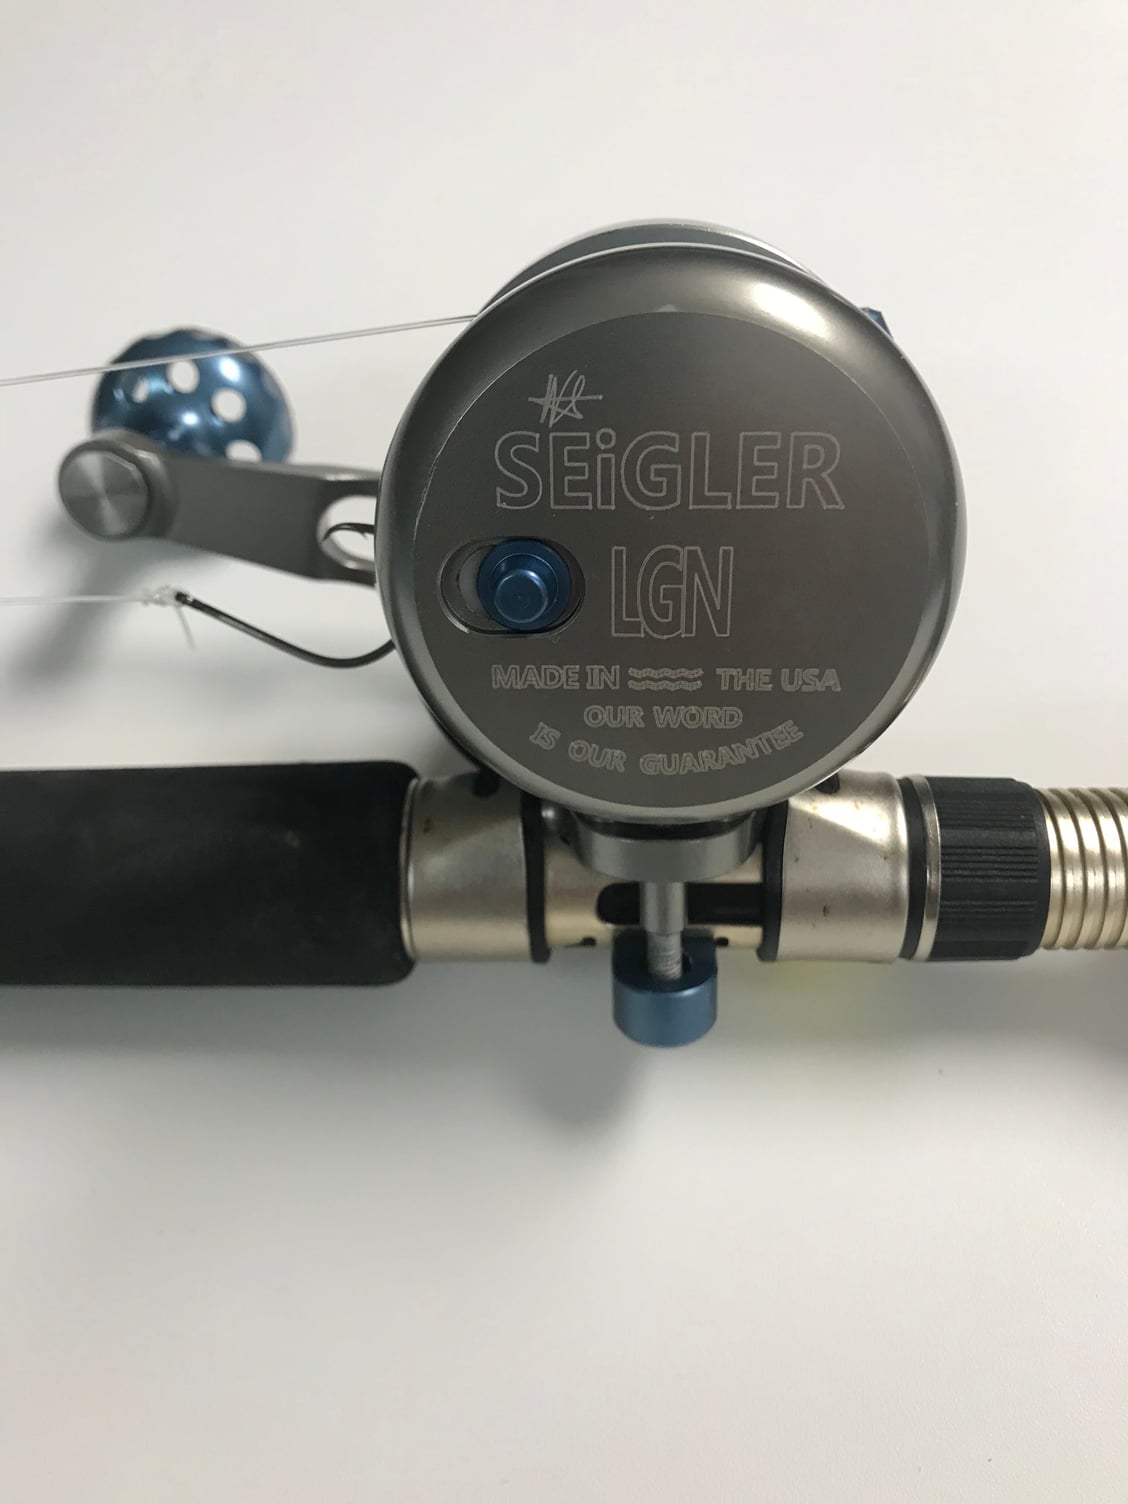 FS Seigler LGN and SG reel - The Hull Truth - Boating and Fishing